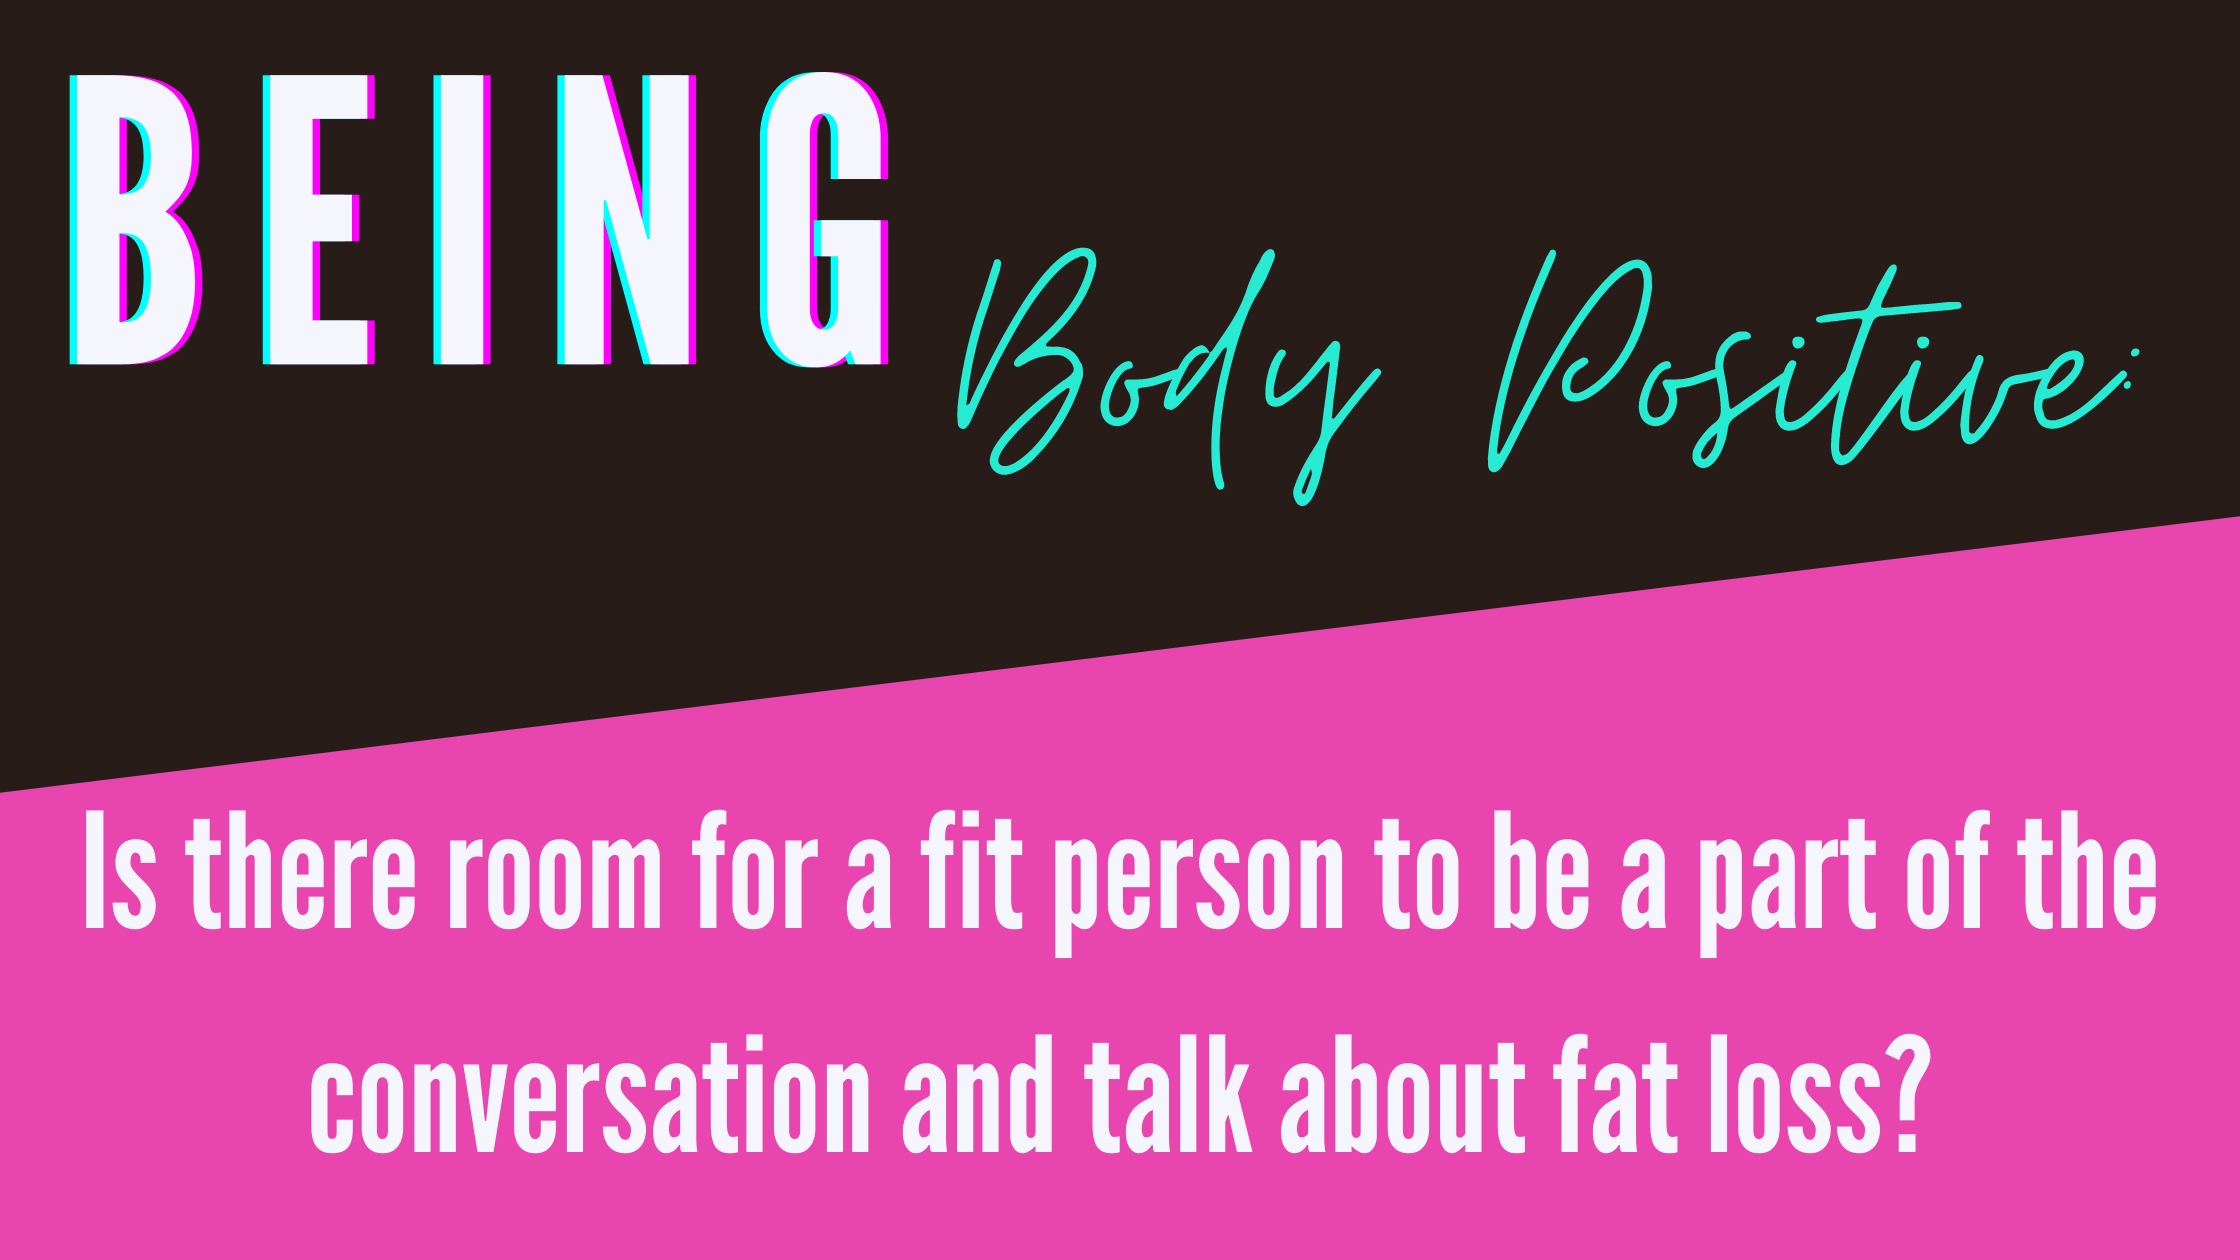 Being Body Positive:  Is there room for a fit person to be a part of the conversation and talk about fat loss?